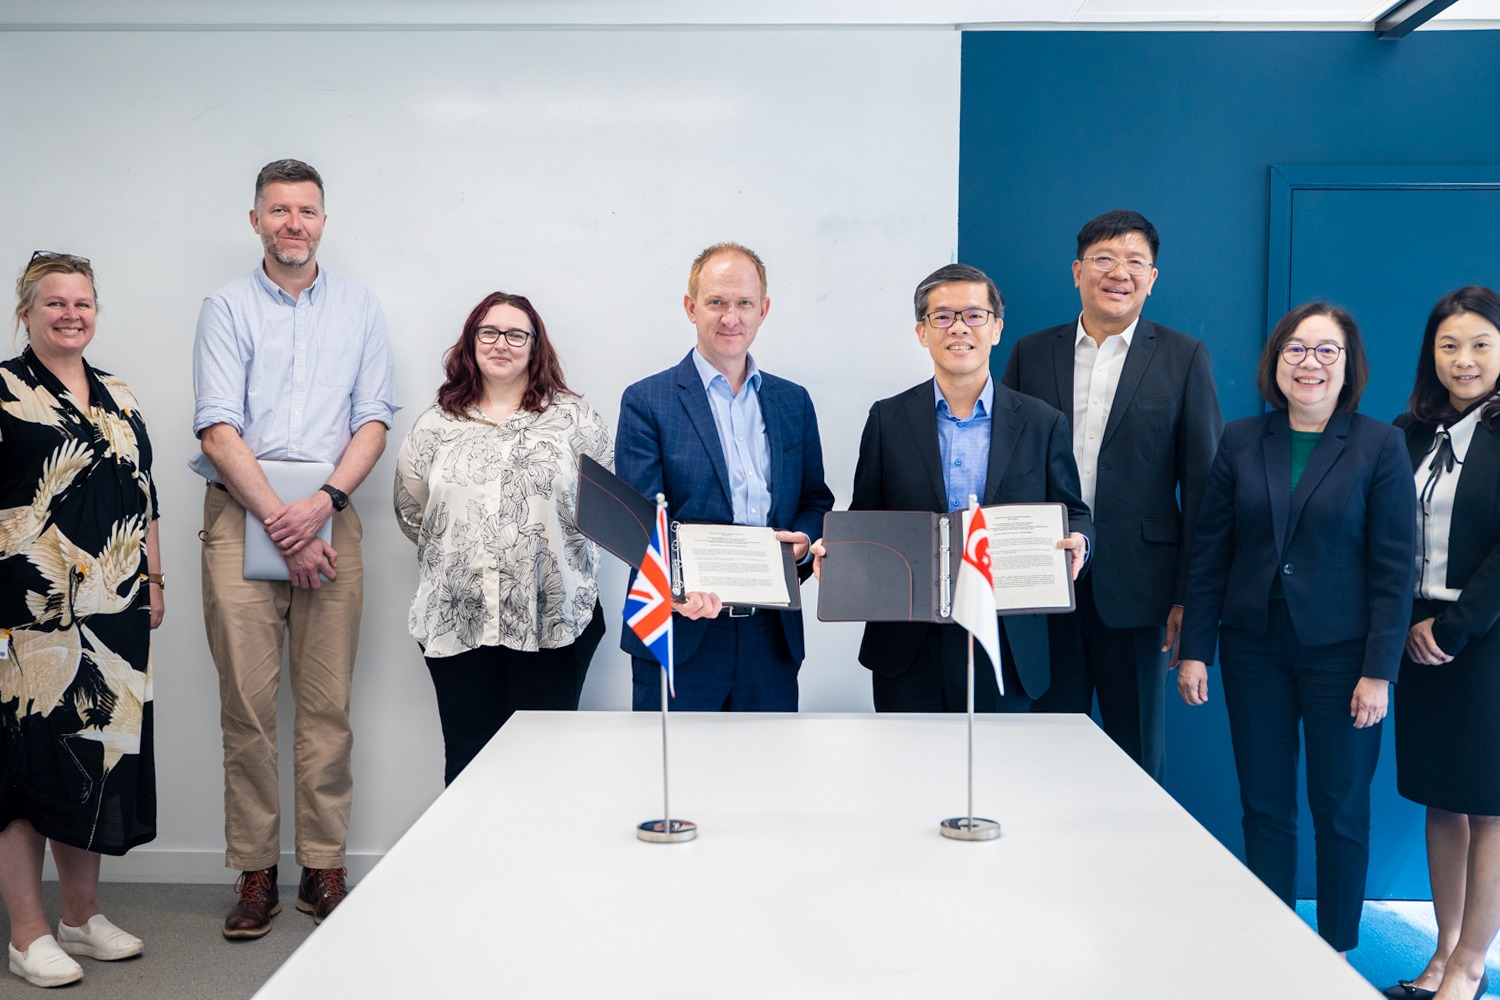 MoU signing between GovTech and UK Government Digital Service